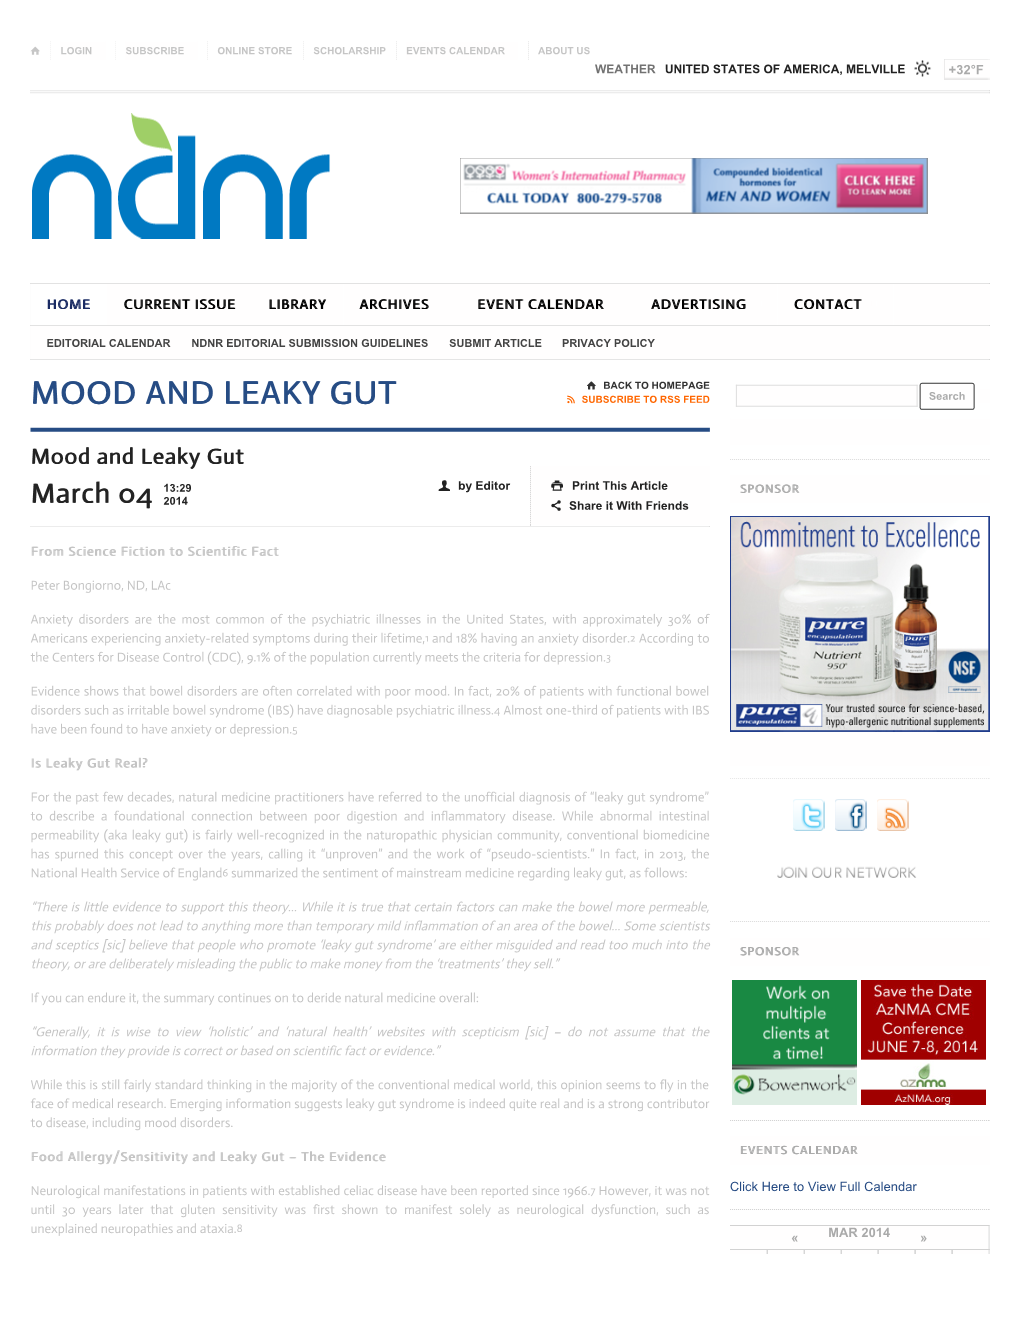 Mood and Leaky Gut | NDNR